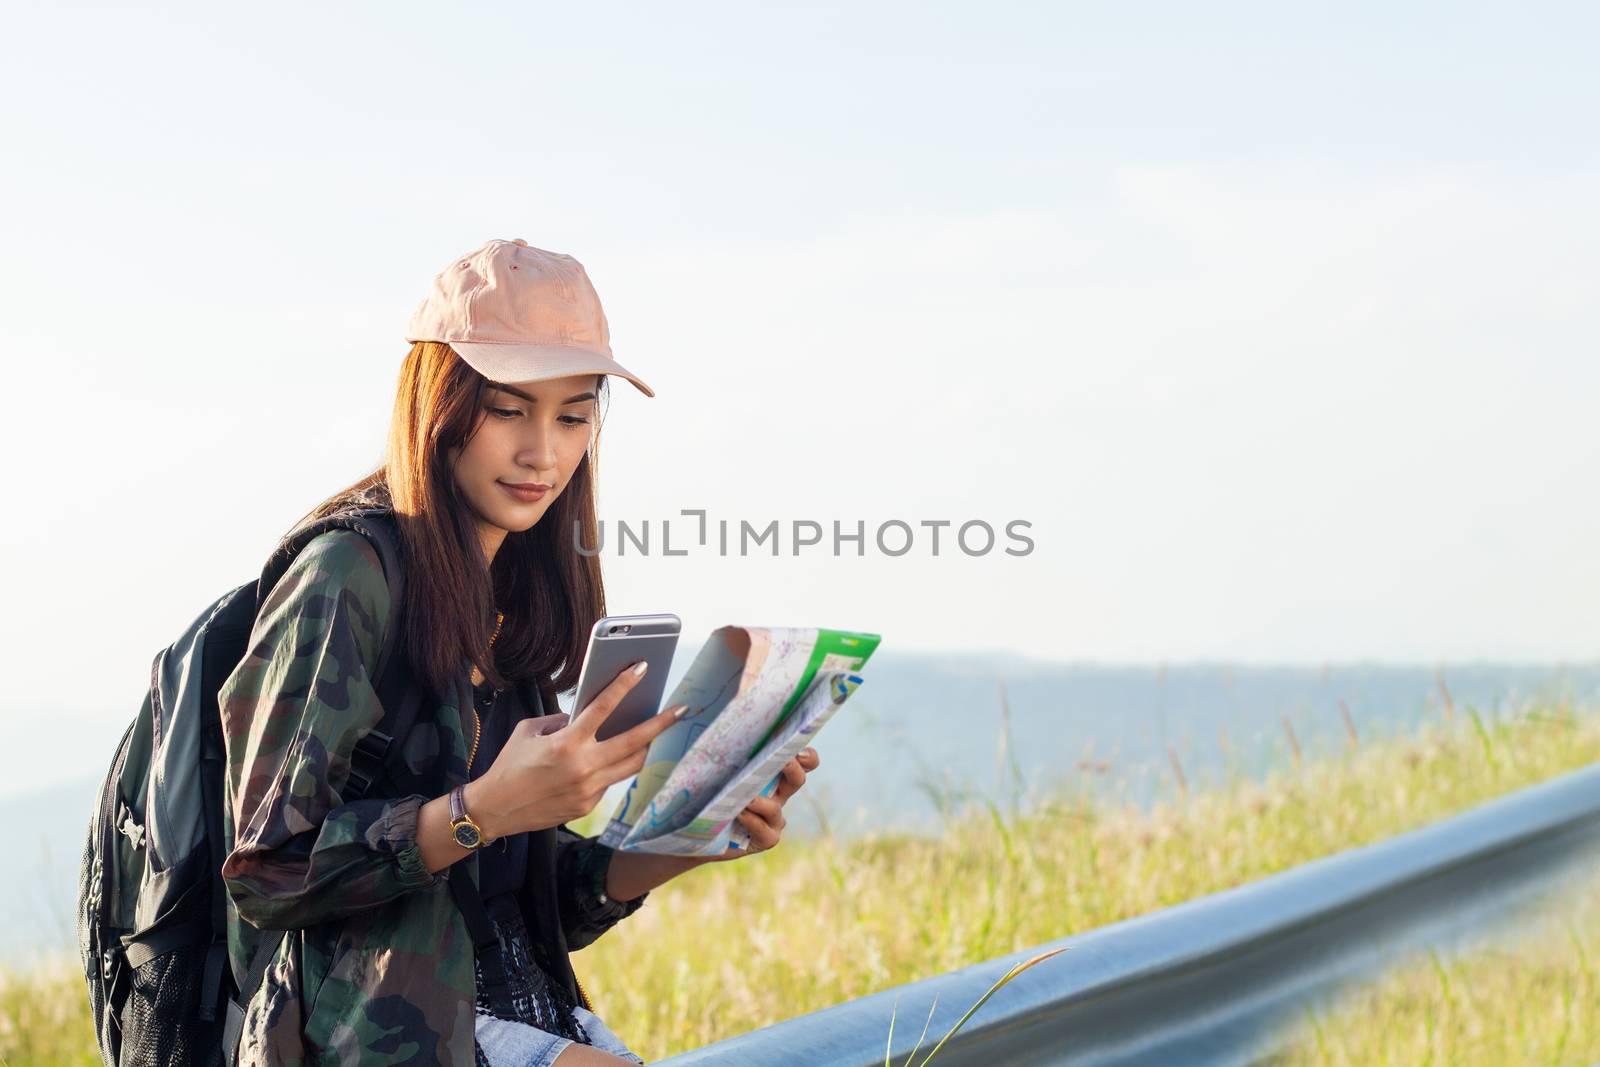 women asian with bright backpack looking at a map. View from bac by Tuiphotoengineer